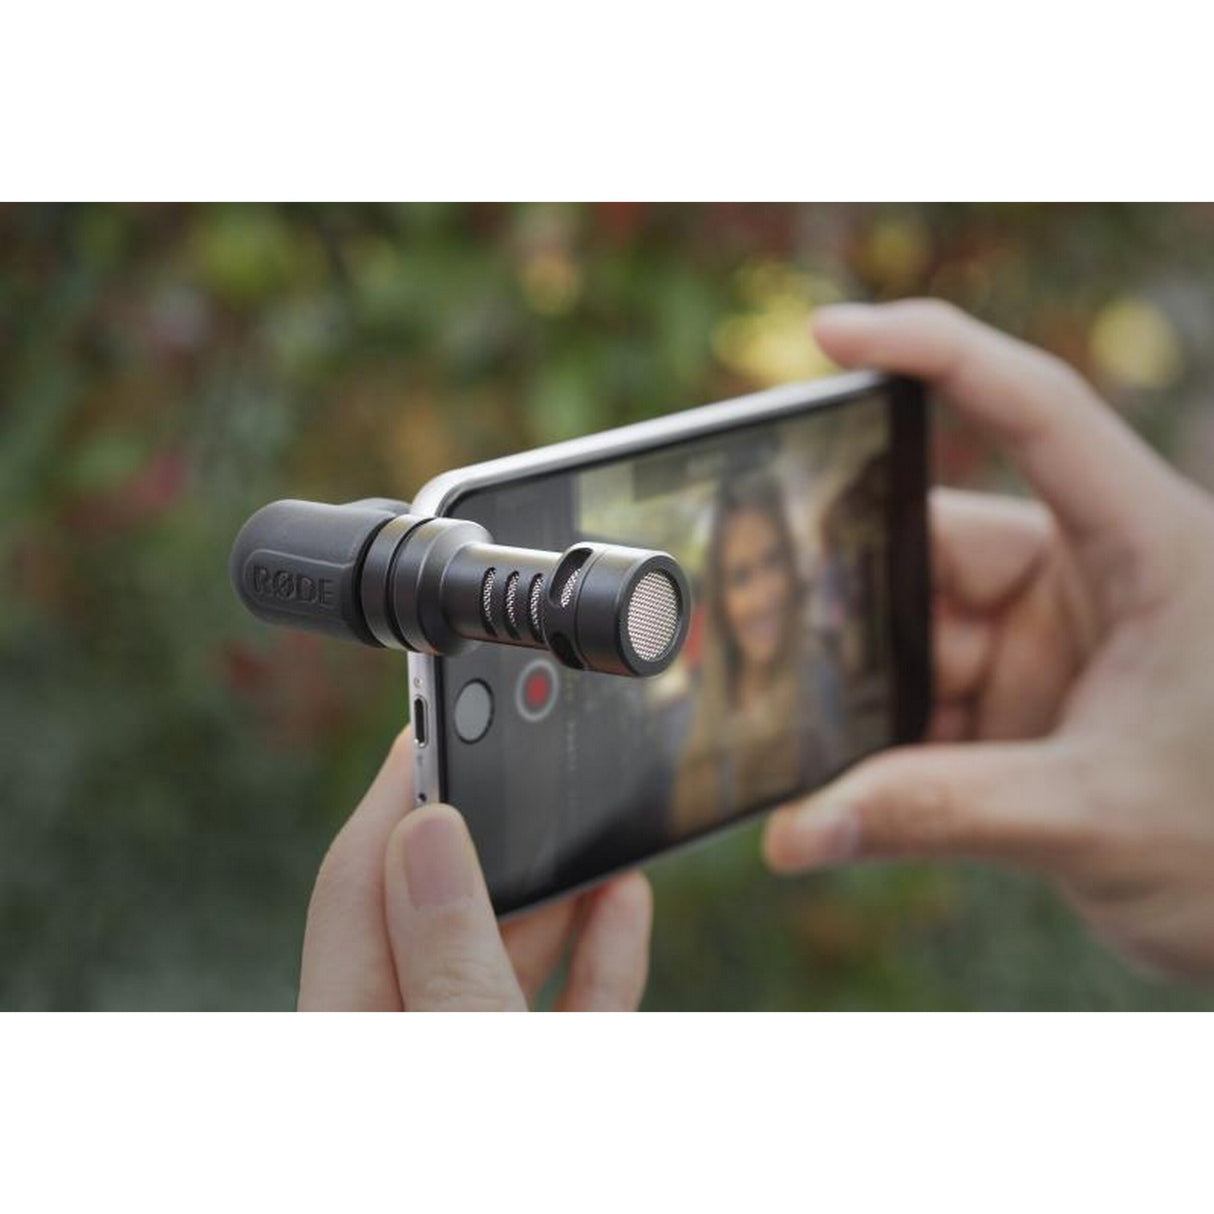 RODE VideoMic ME Directional Microphone for Smartphones